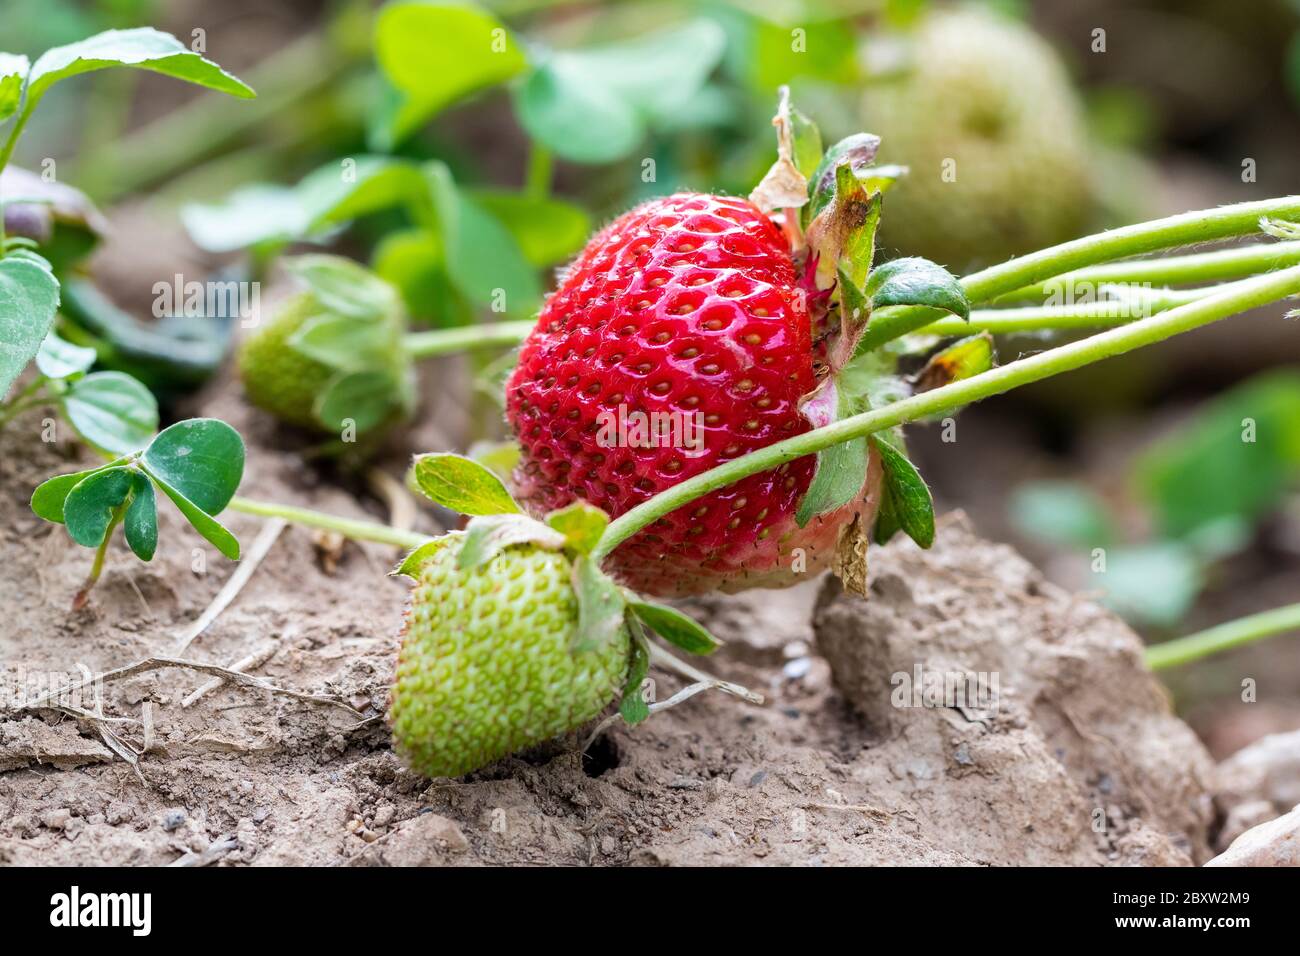 Selective focus of wild strawberries in different stages of ripening, green and red. Spain Stock Photo